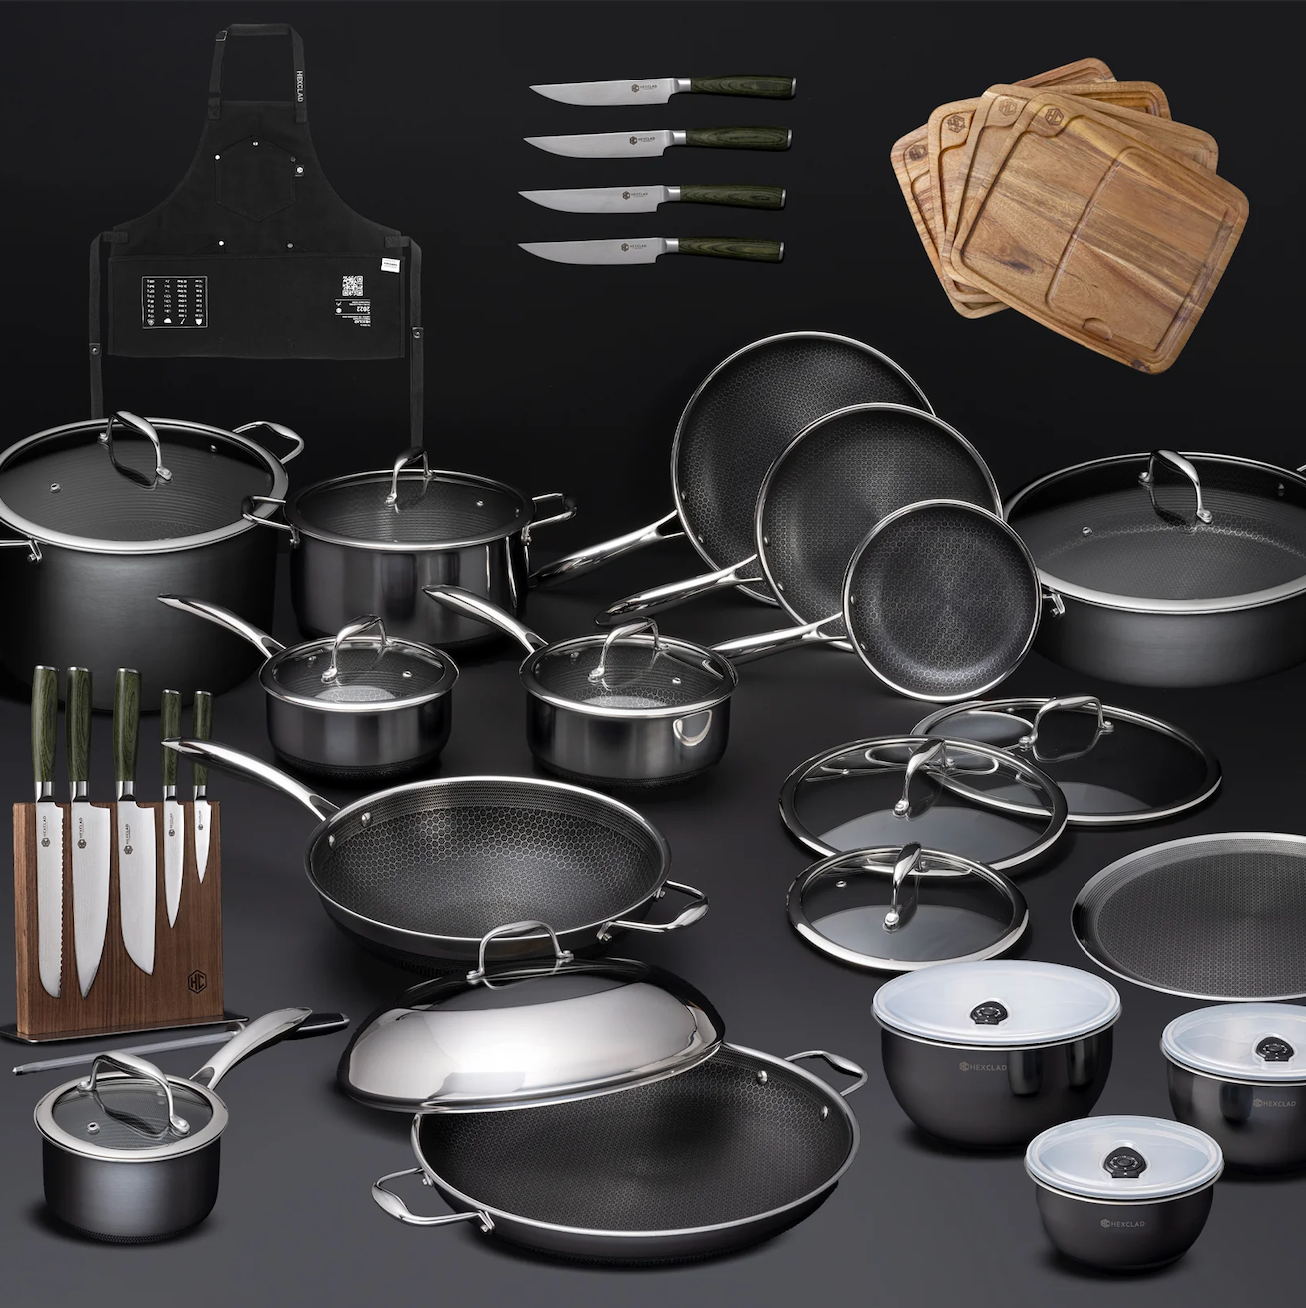 Why Gordon Ramsay Uses Hexclad Pans & Cookware Sets